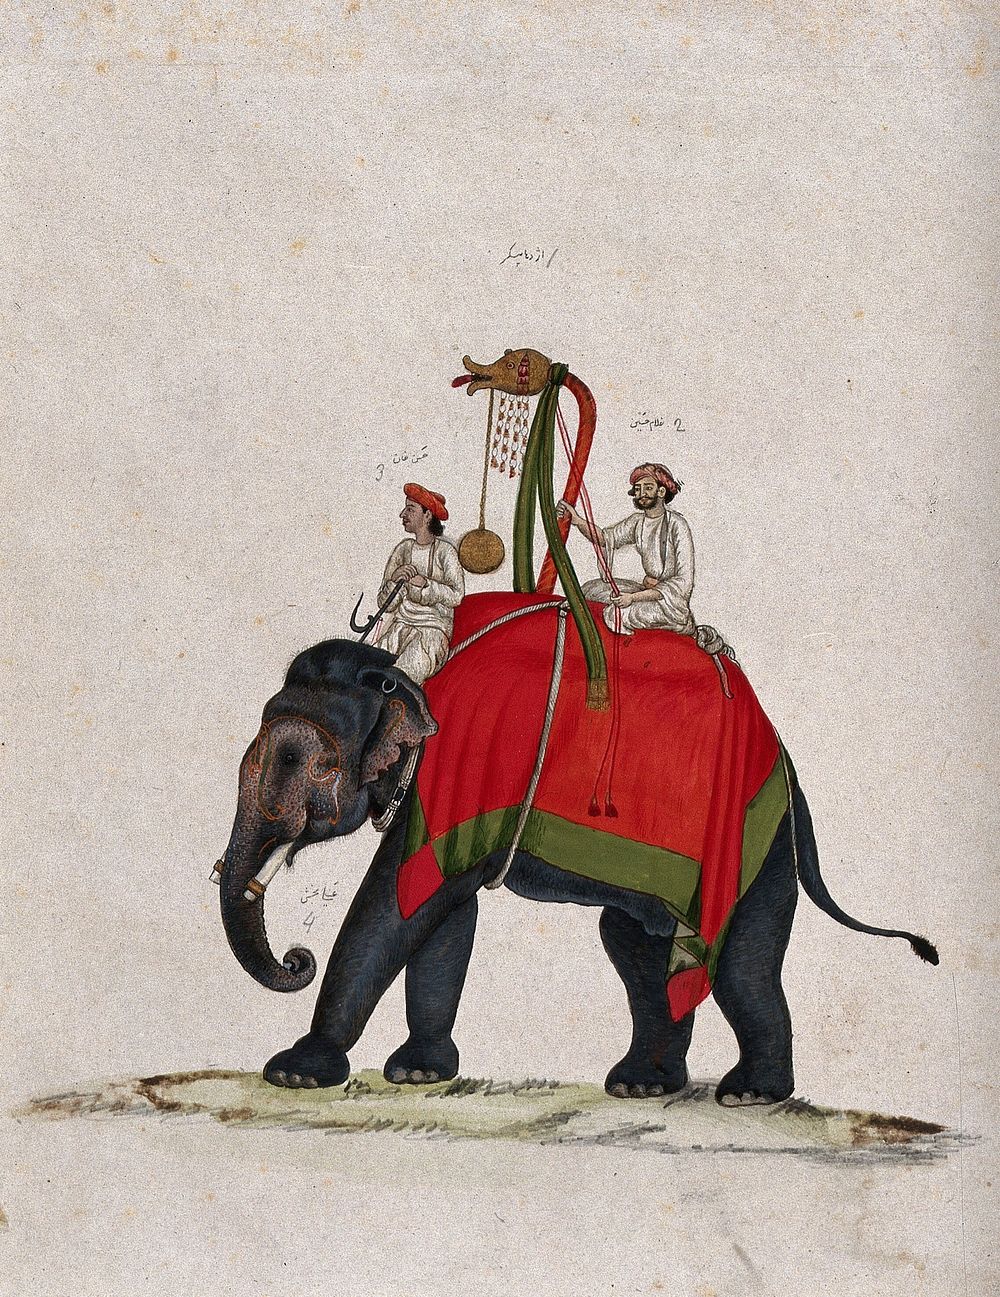 A man sitting on top of a elephant holding a decorative stick  with a medallion. Gouache painting by an Indian artist.